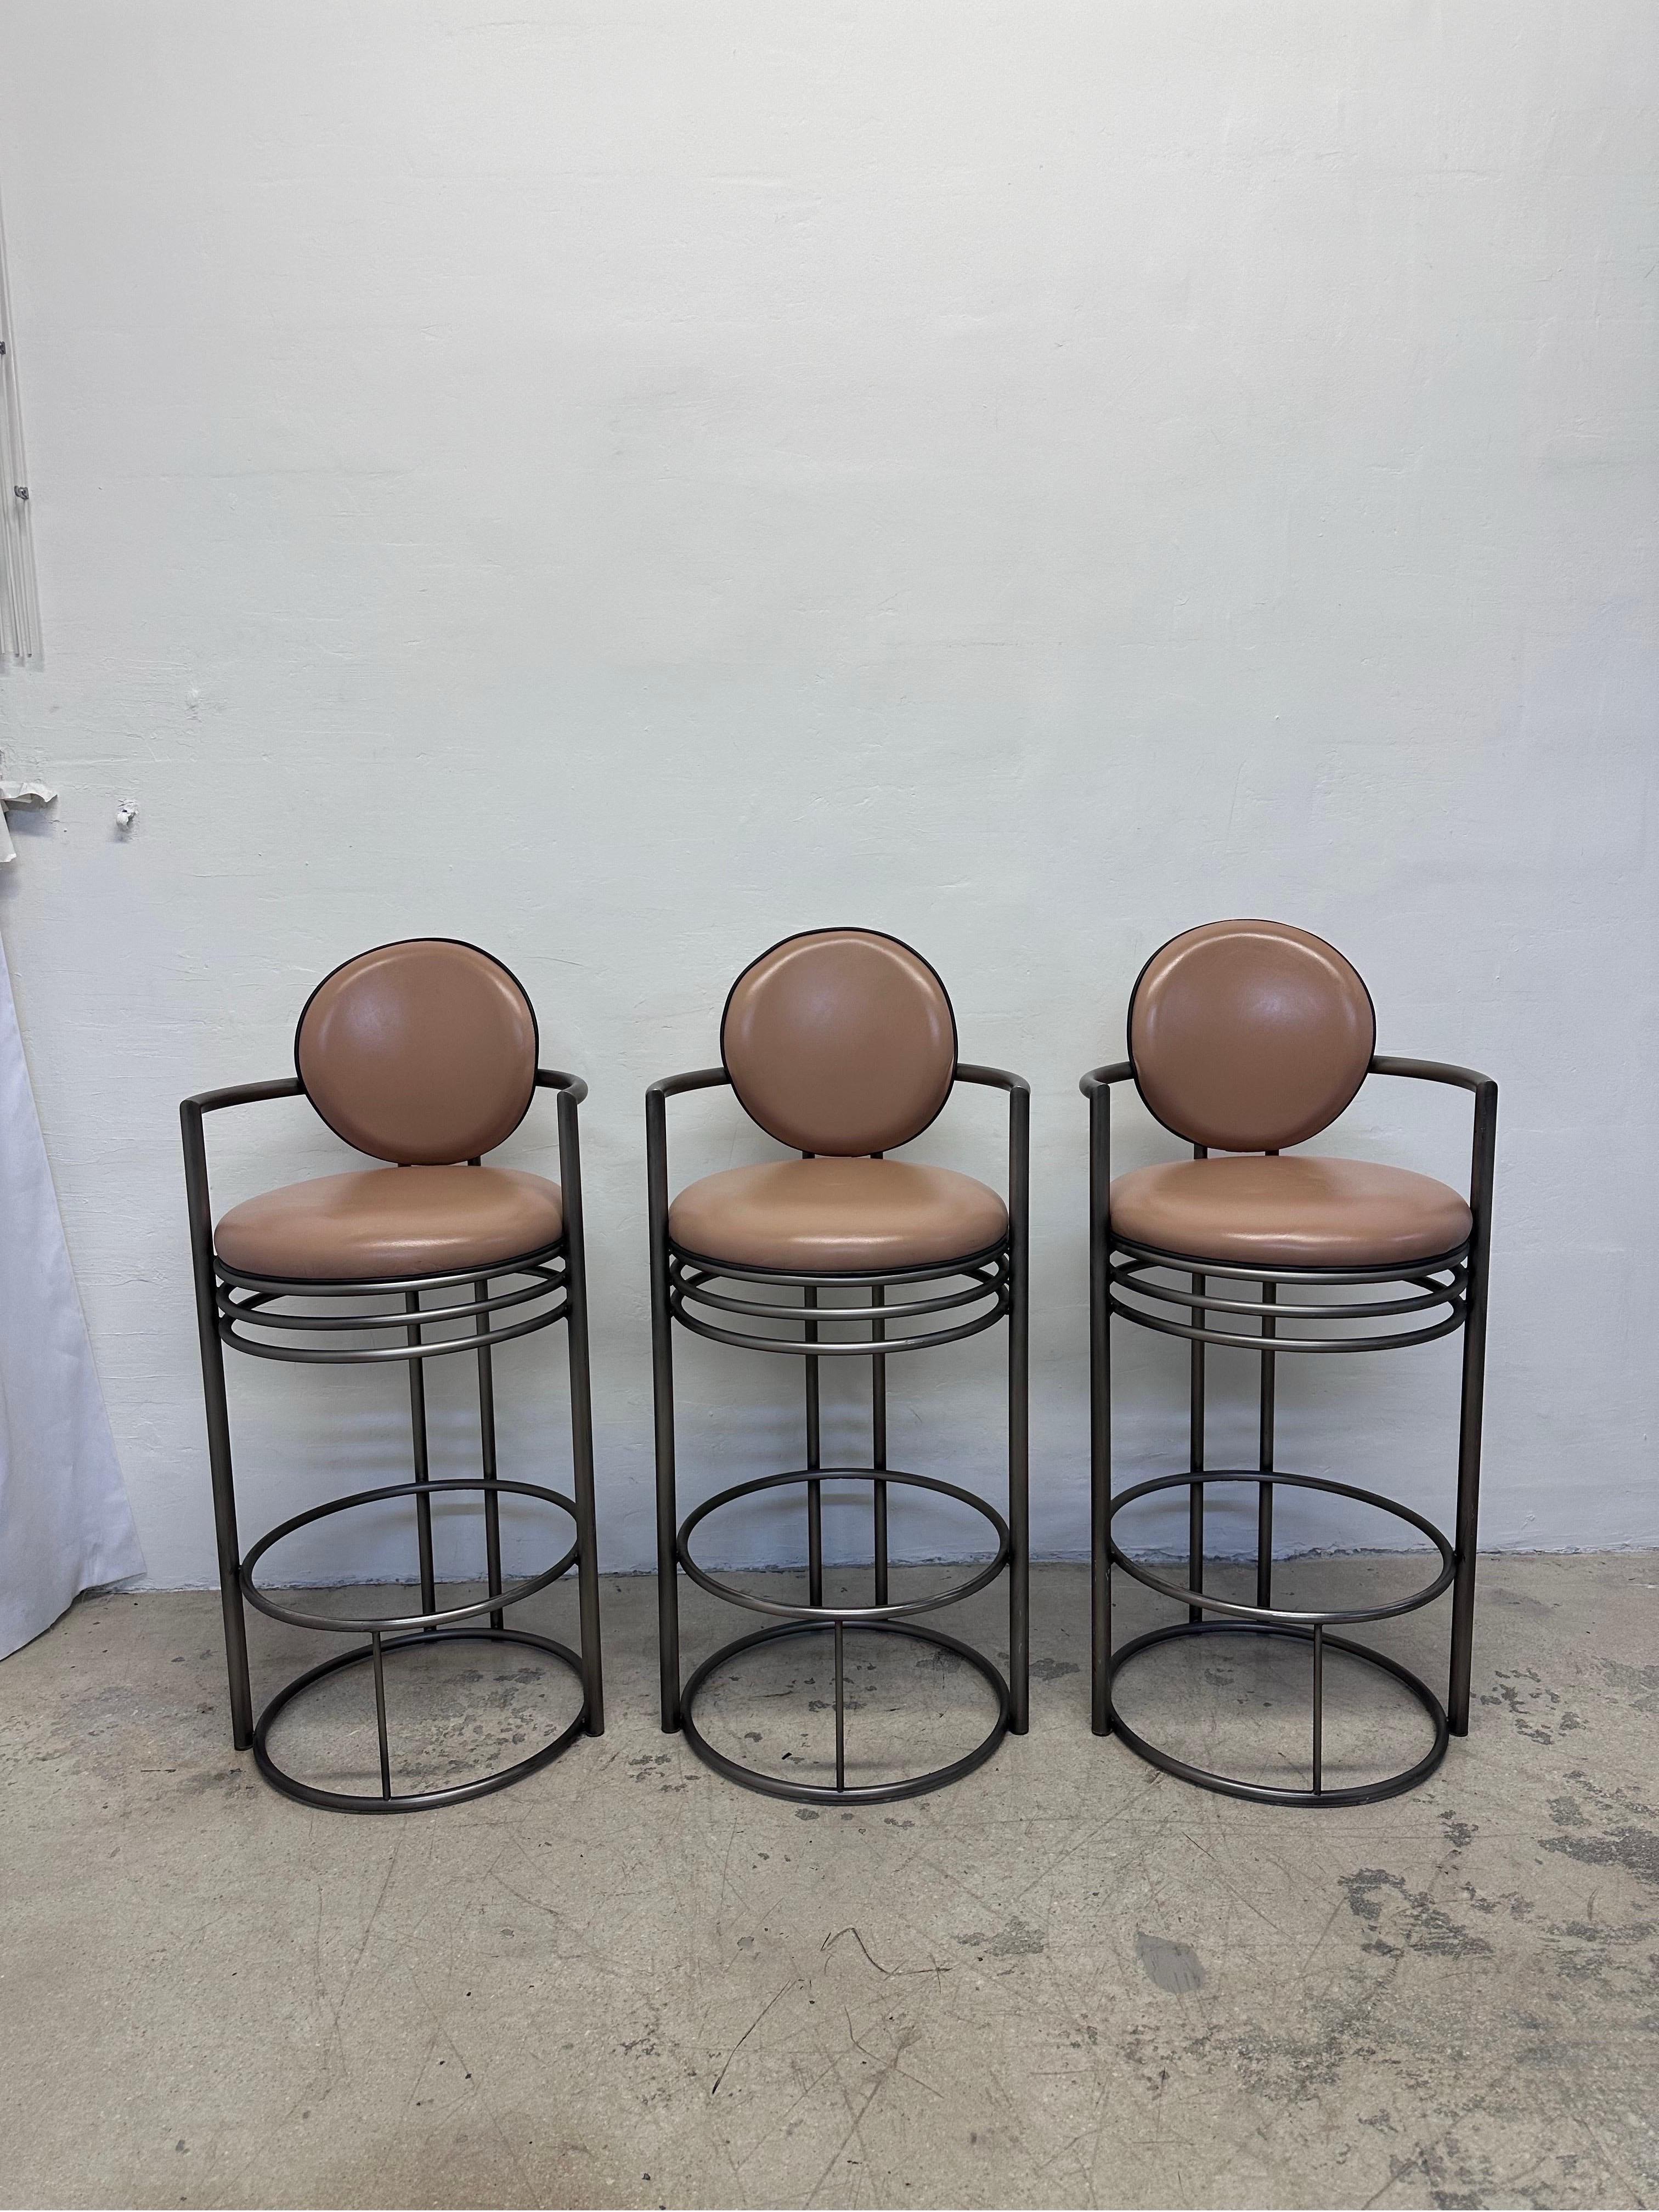 Set of three Art Deco revival modern bar stools with nude leather cushioned seats and back rest with black piping on a tubular steel base.  Designed and manufactured by DIA - Design Institute America circa 1980s.

Arm Height: 34-3/4